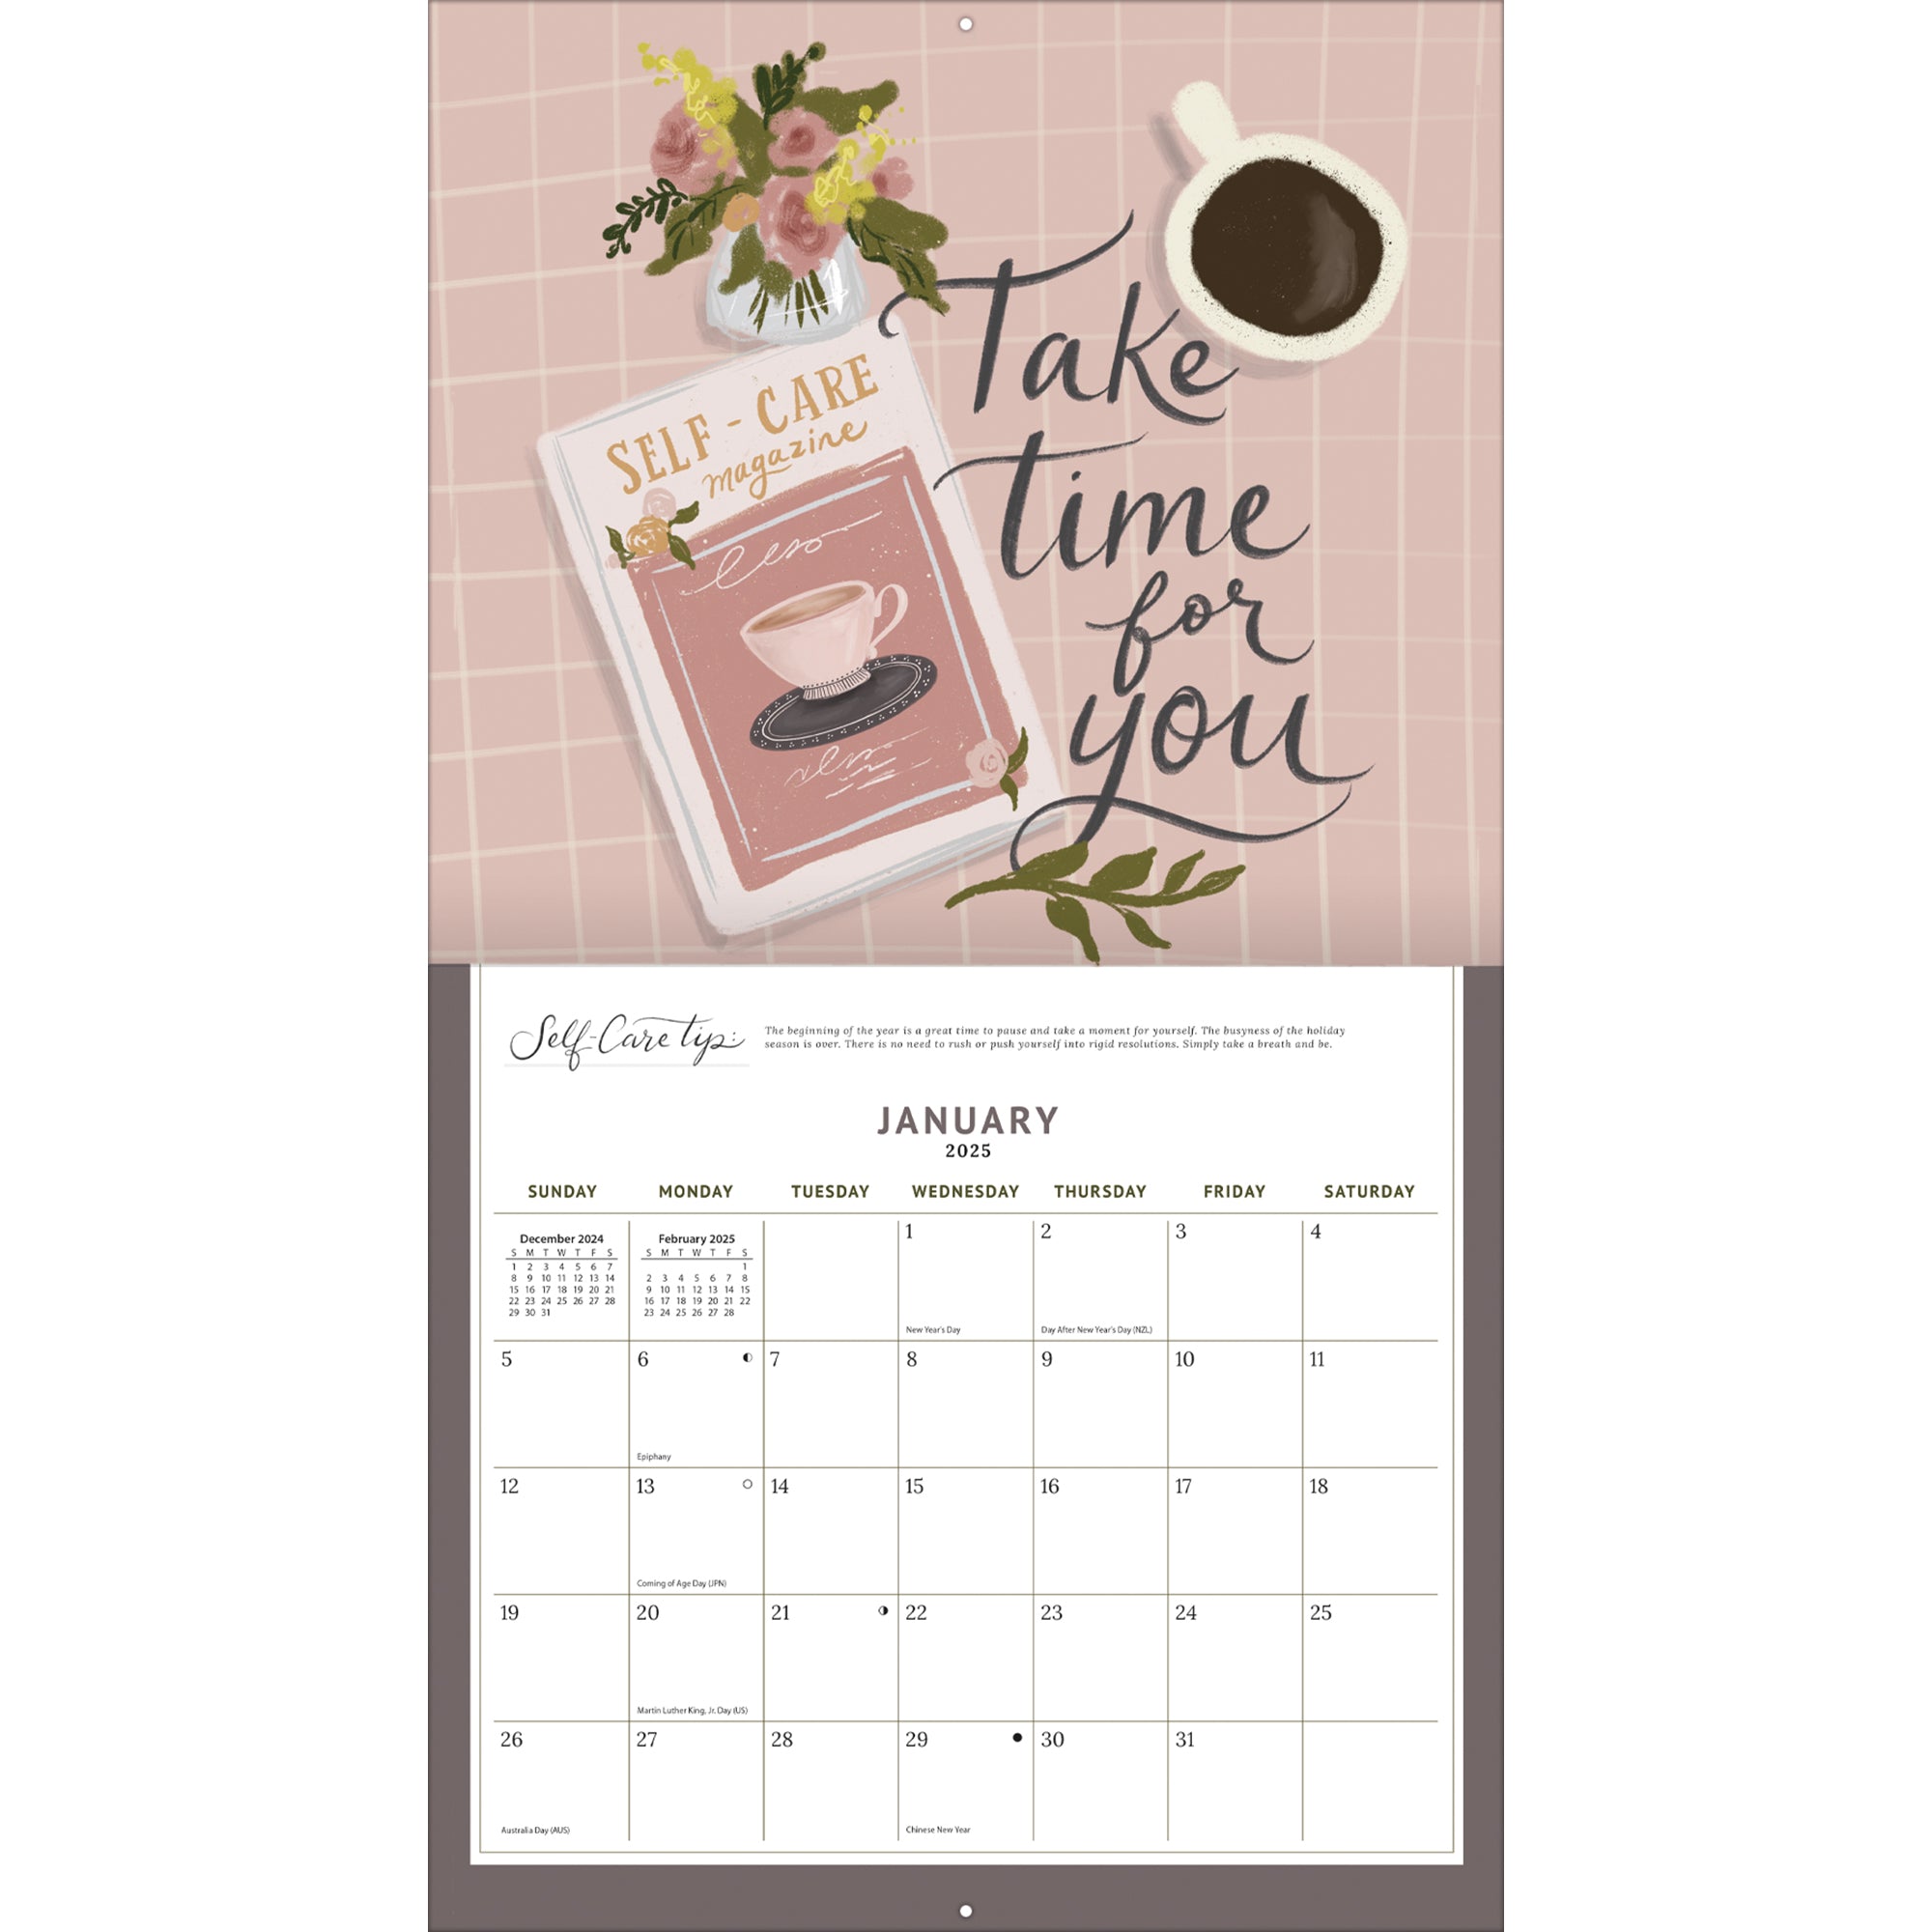 2025 Be Gentle By Lily & Val - LANG Deluxe Wall Calendar